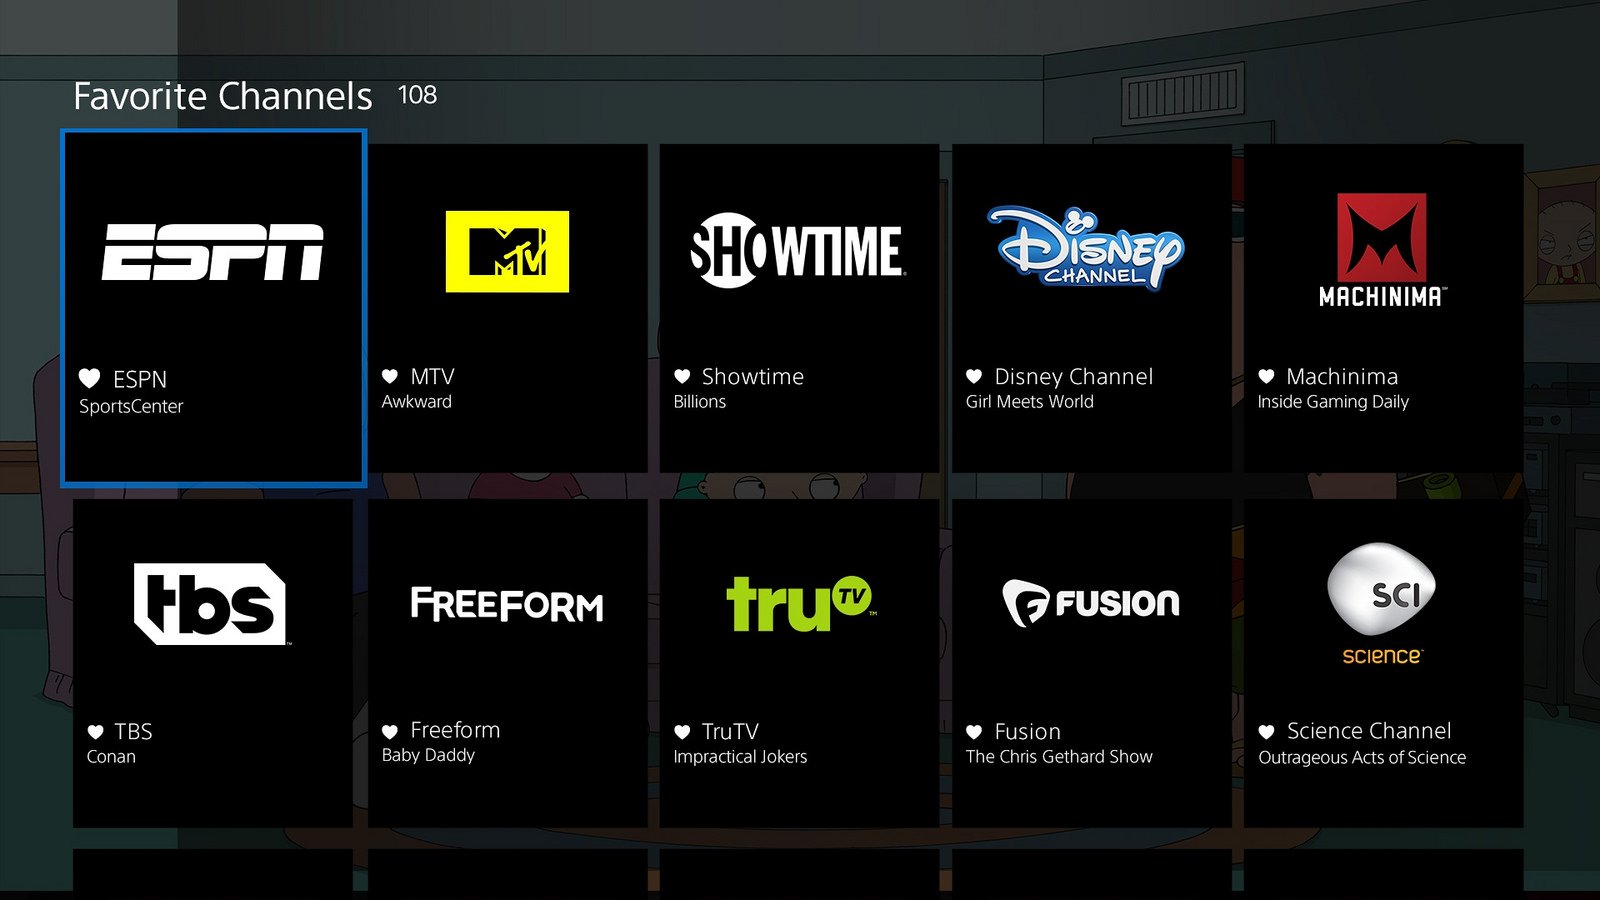 PlayStation on "PlayStation Vue goes nationwide starting in new markets. Full details: https://t.co/8H4hBRQSf2 https://t.co/xSjBPSh4zL" / Twitter